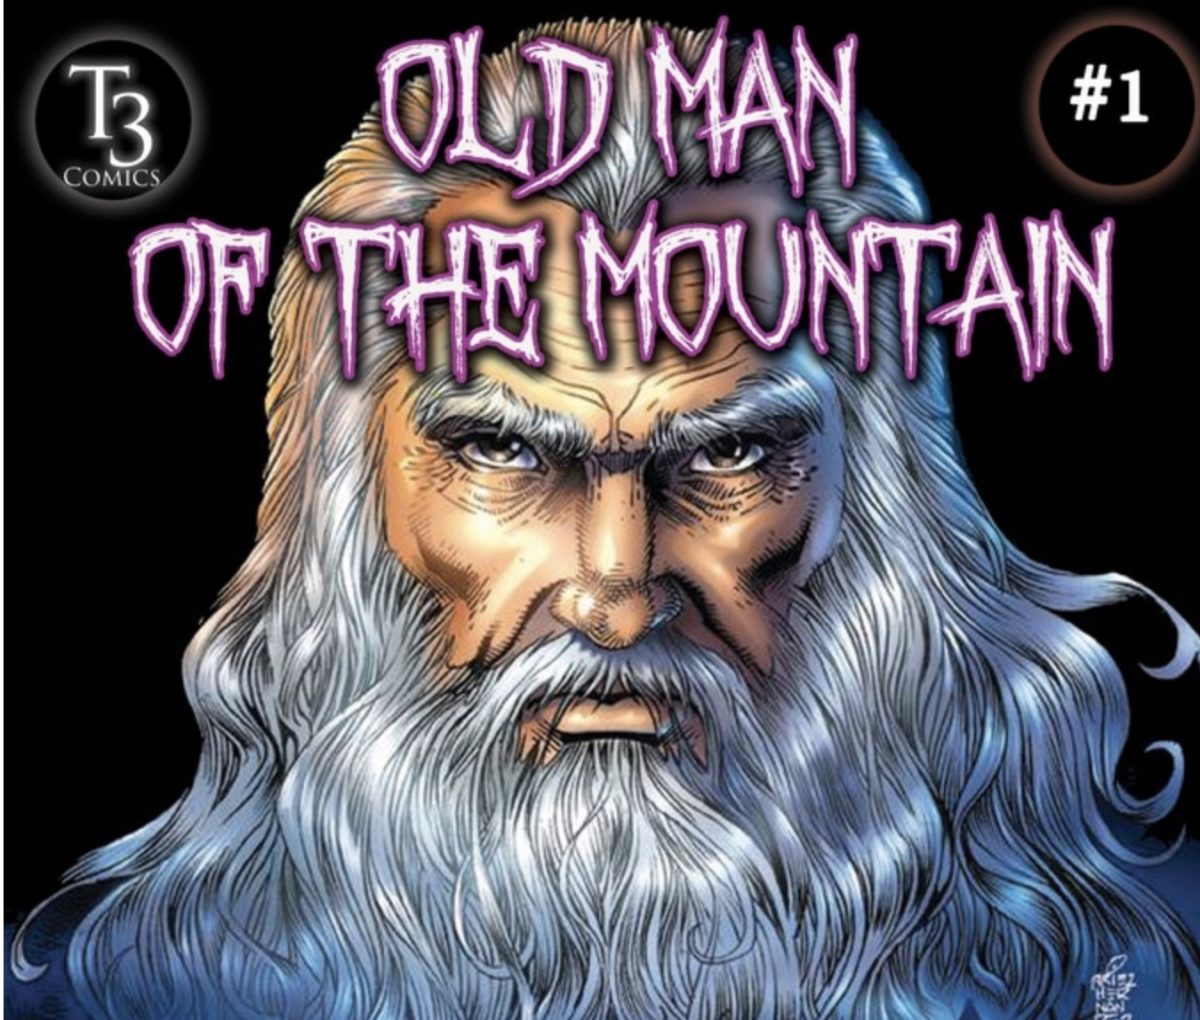 Congrats to the Team Behind Old Man of the Mountain for the Climb up the SUCCESSFULLY KICKSTARTER mountain